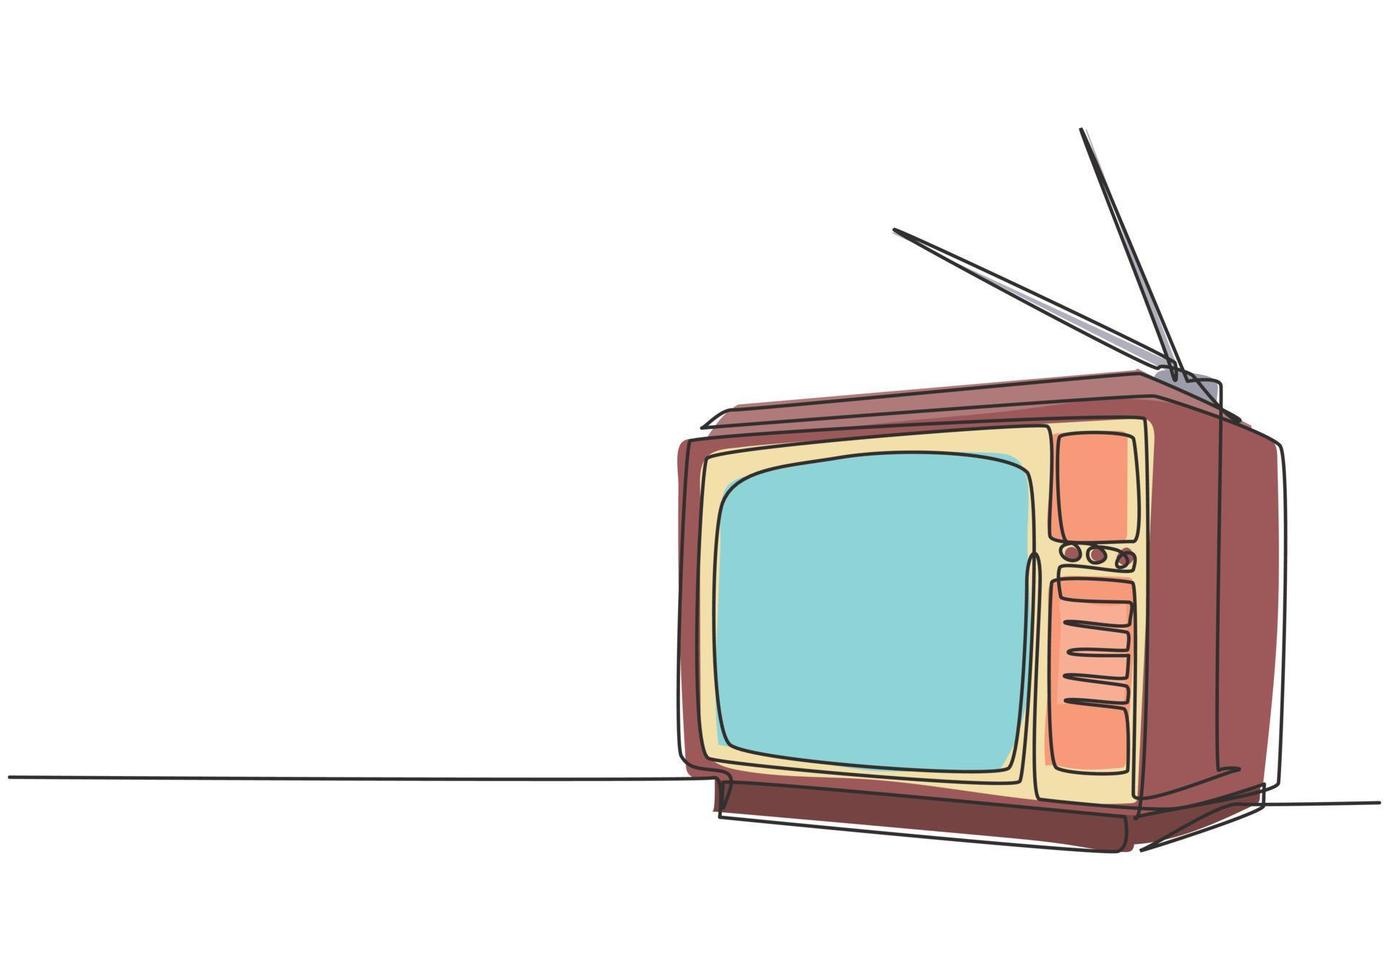 One continuous line drawing of retro old fashioned tv with wooden case and internal antenna. Classic vintage analog television concept single line draw design vector graphic illustration